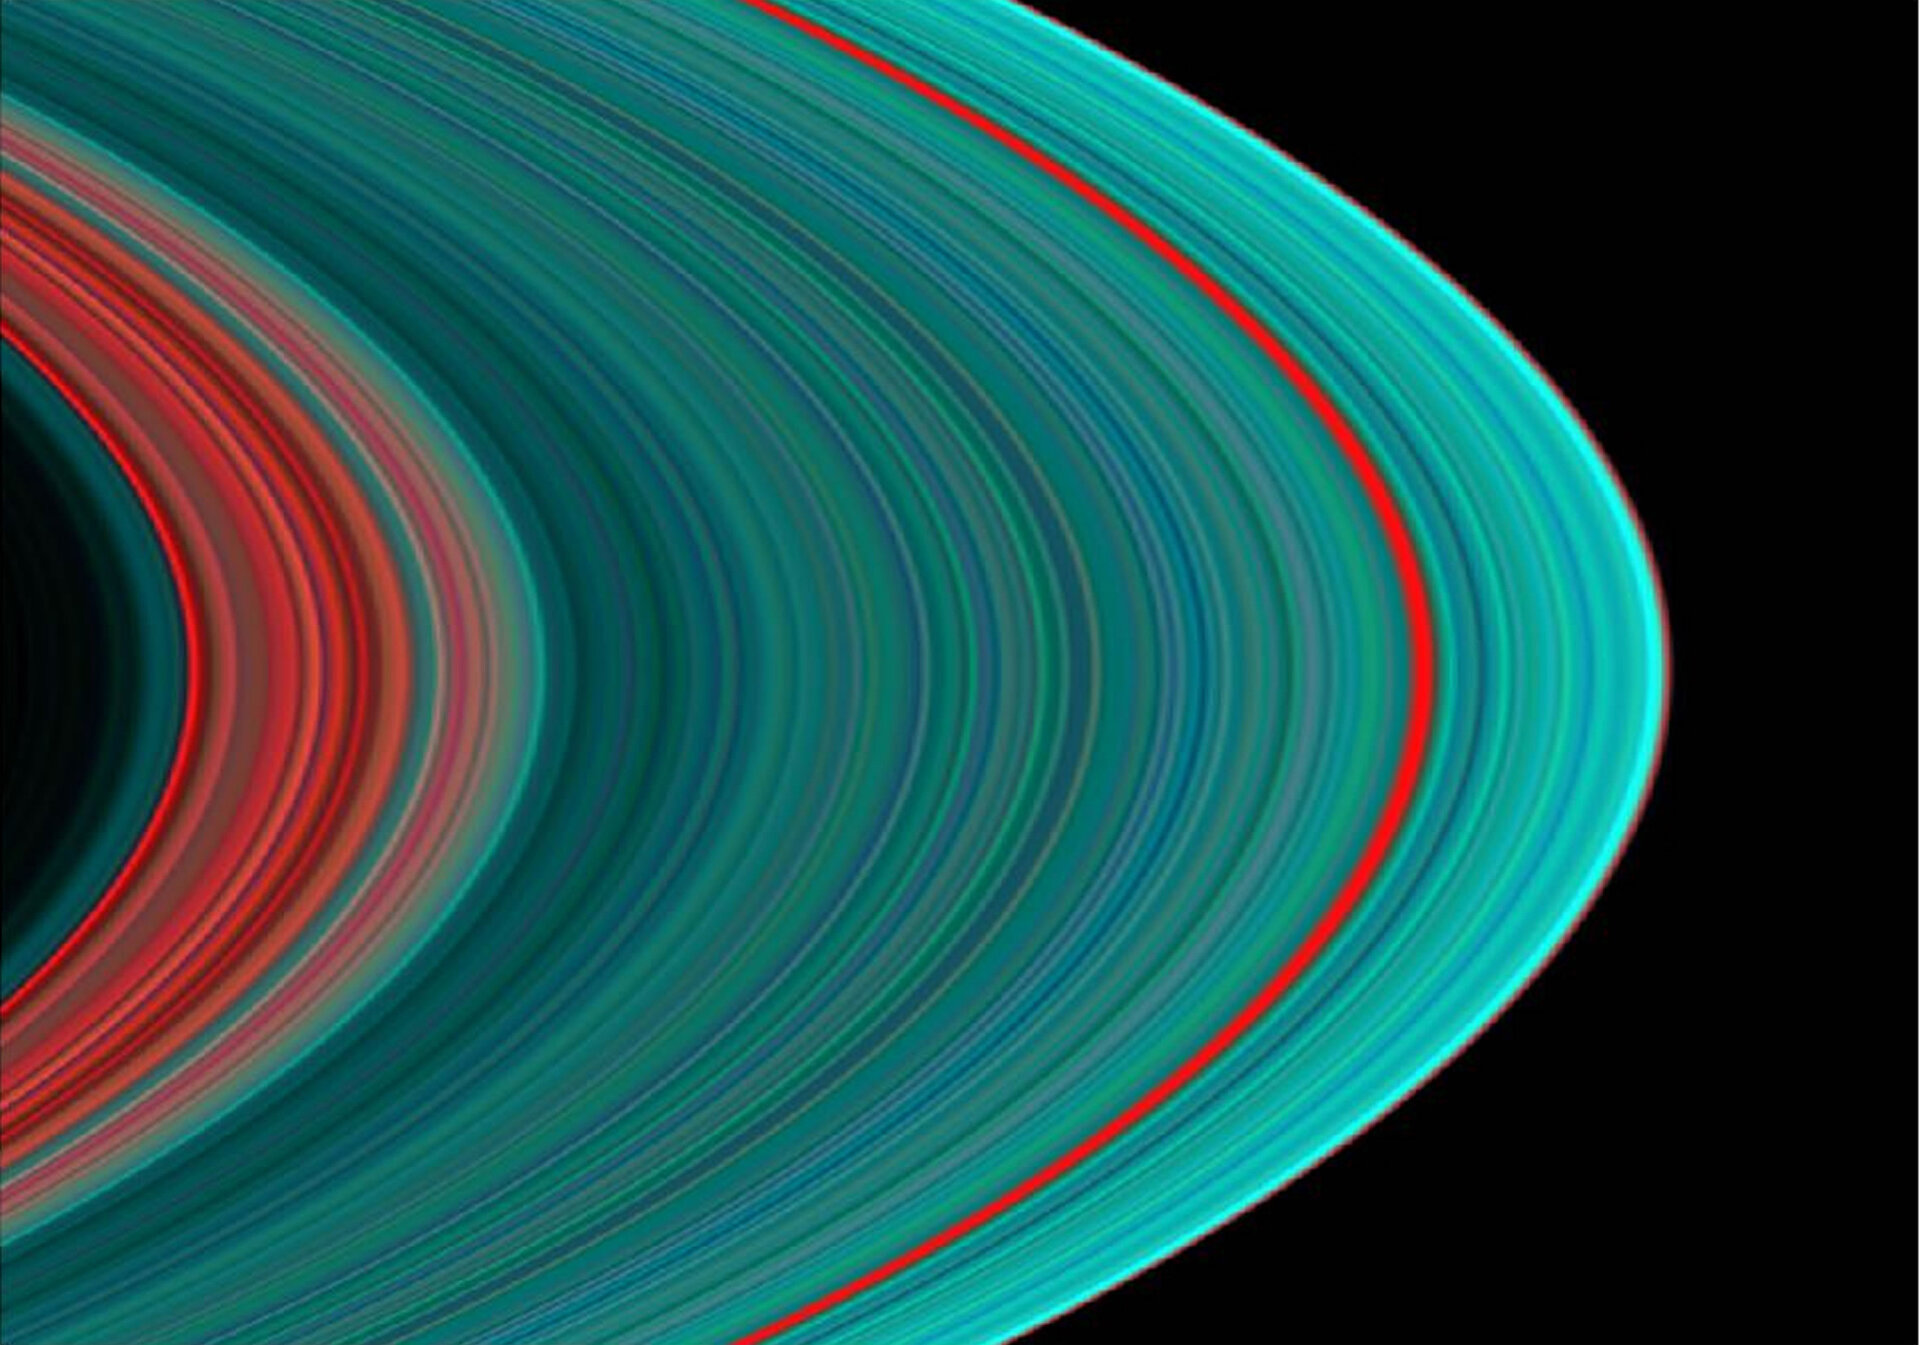 The A ring in ultraviolet